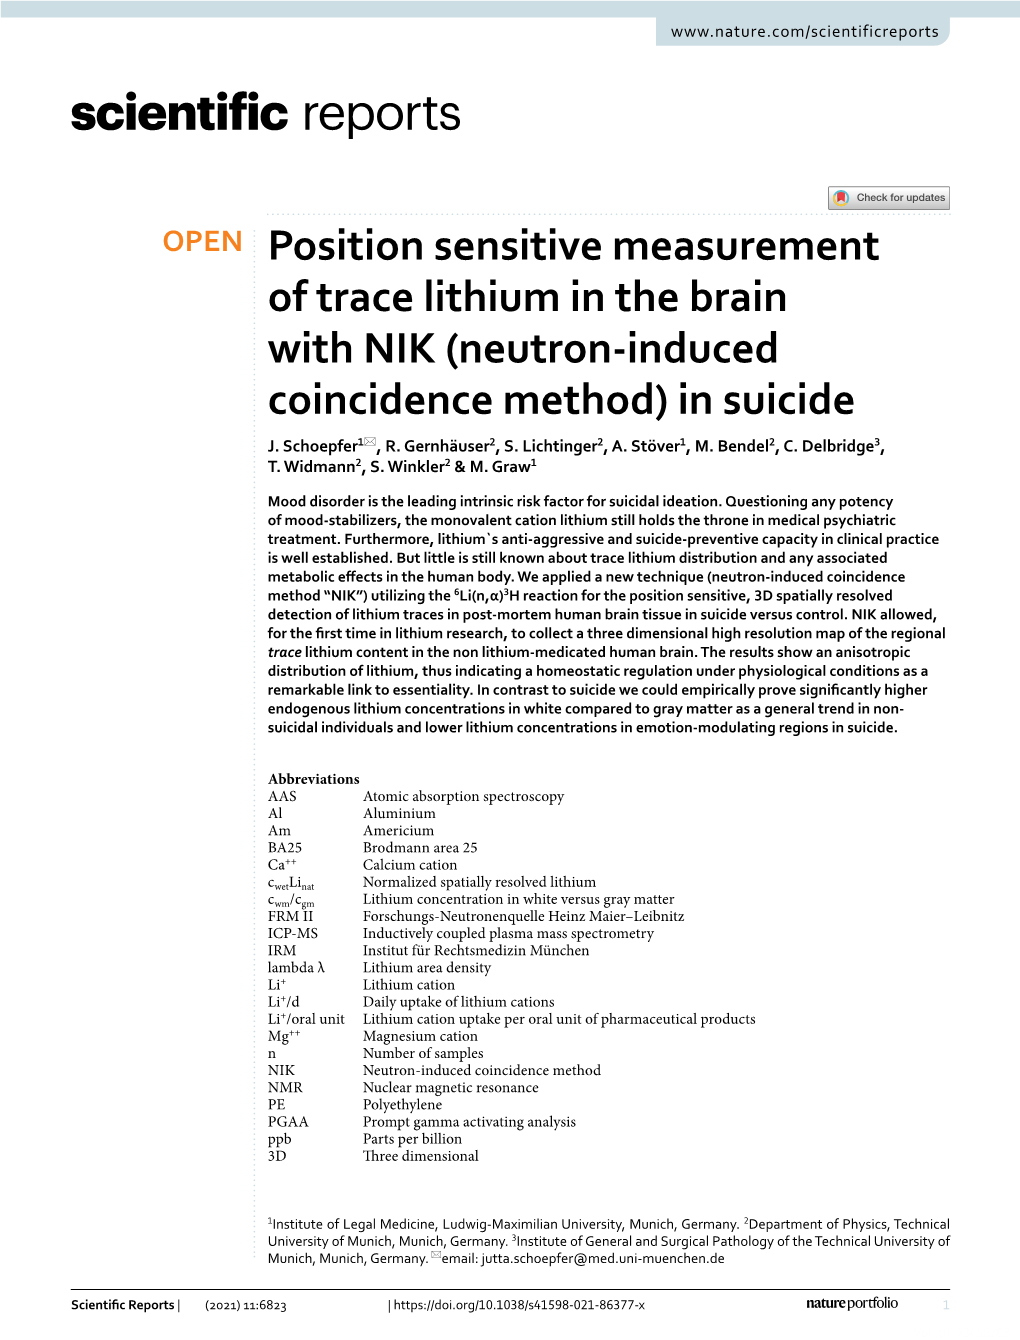 Position Sensitive Measurement of Trace Lithium in the Brain with NIK (Neutron‑Induced Coincidence Method) in Suicide J